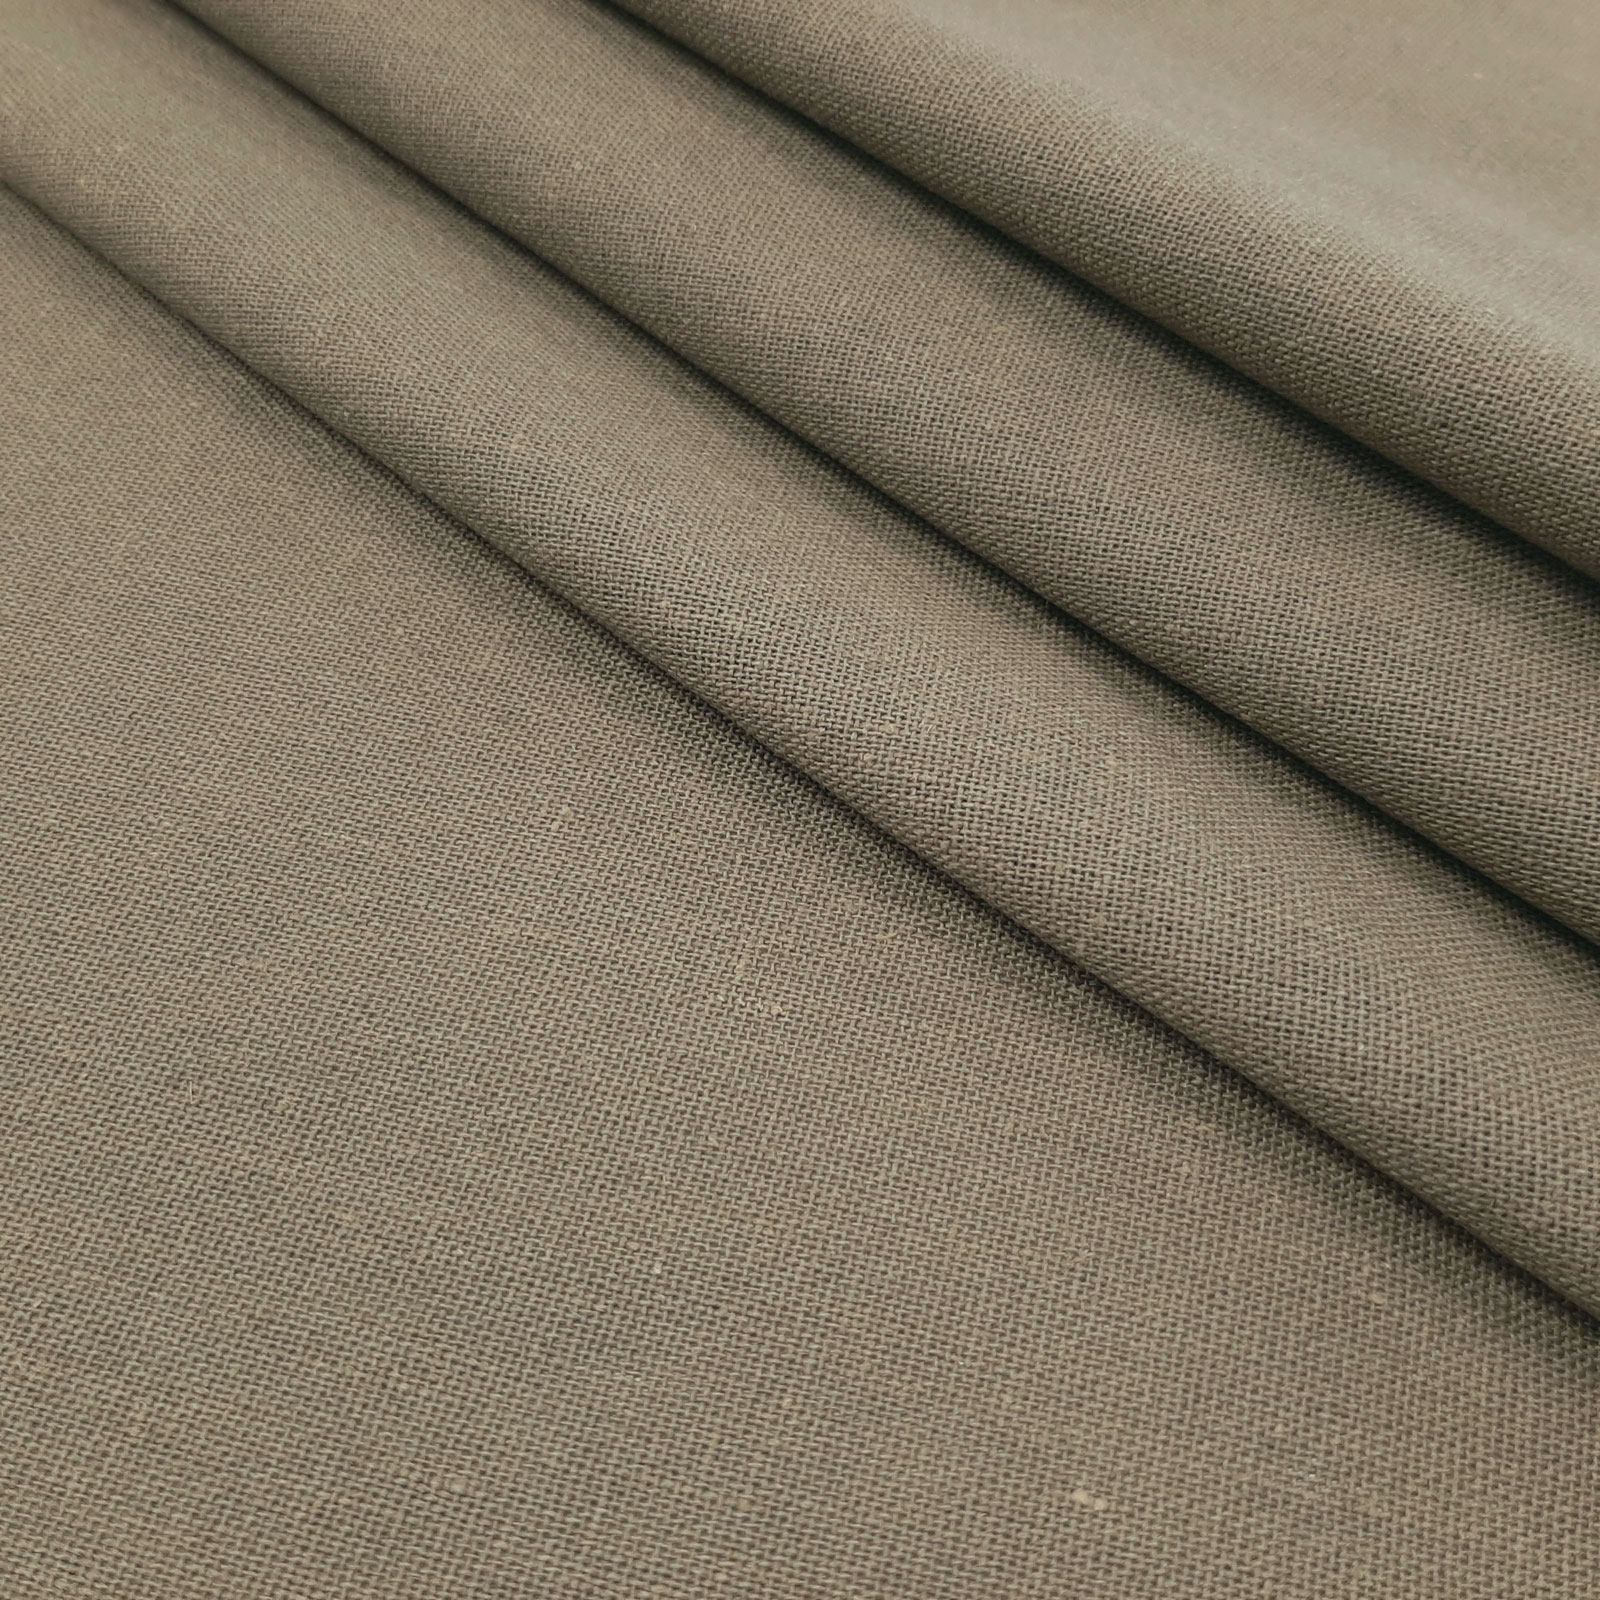 Bella - natural linen cotton fabric -Taupe